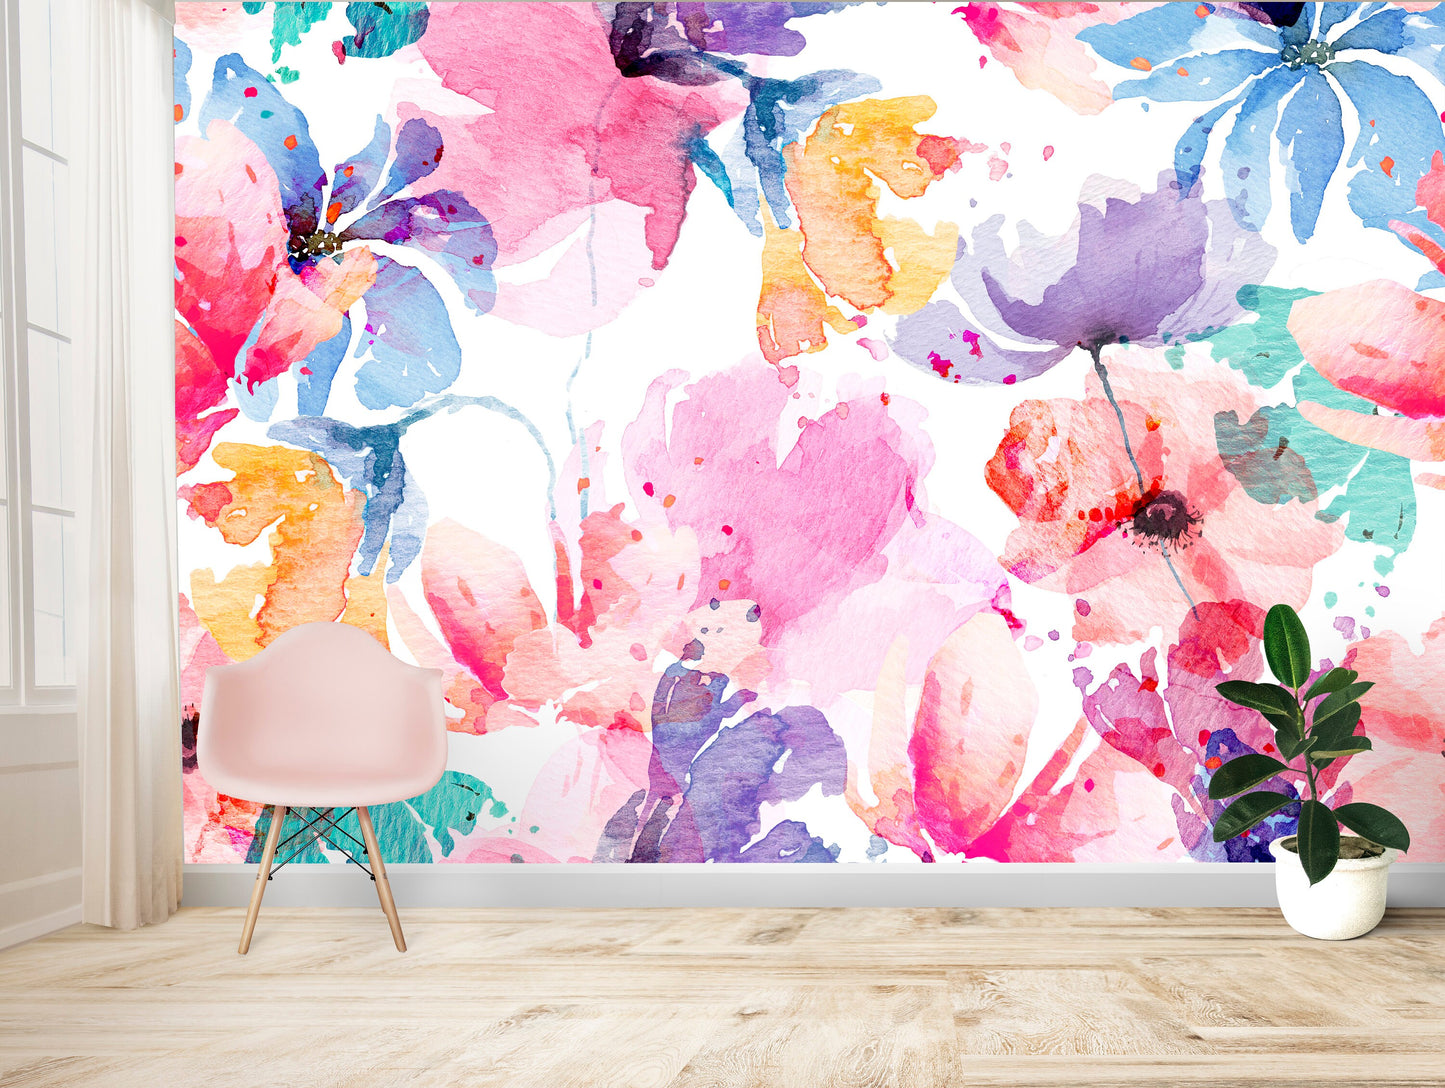 Colorful Wallpaper Peel and Stick, Watercolor Floral Wallpaper, Big Flowers Wallpaper, Removable Wall Paper